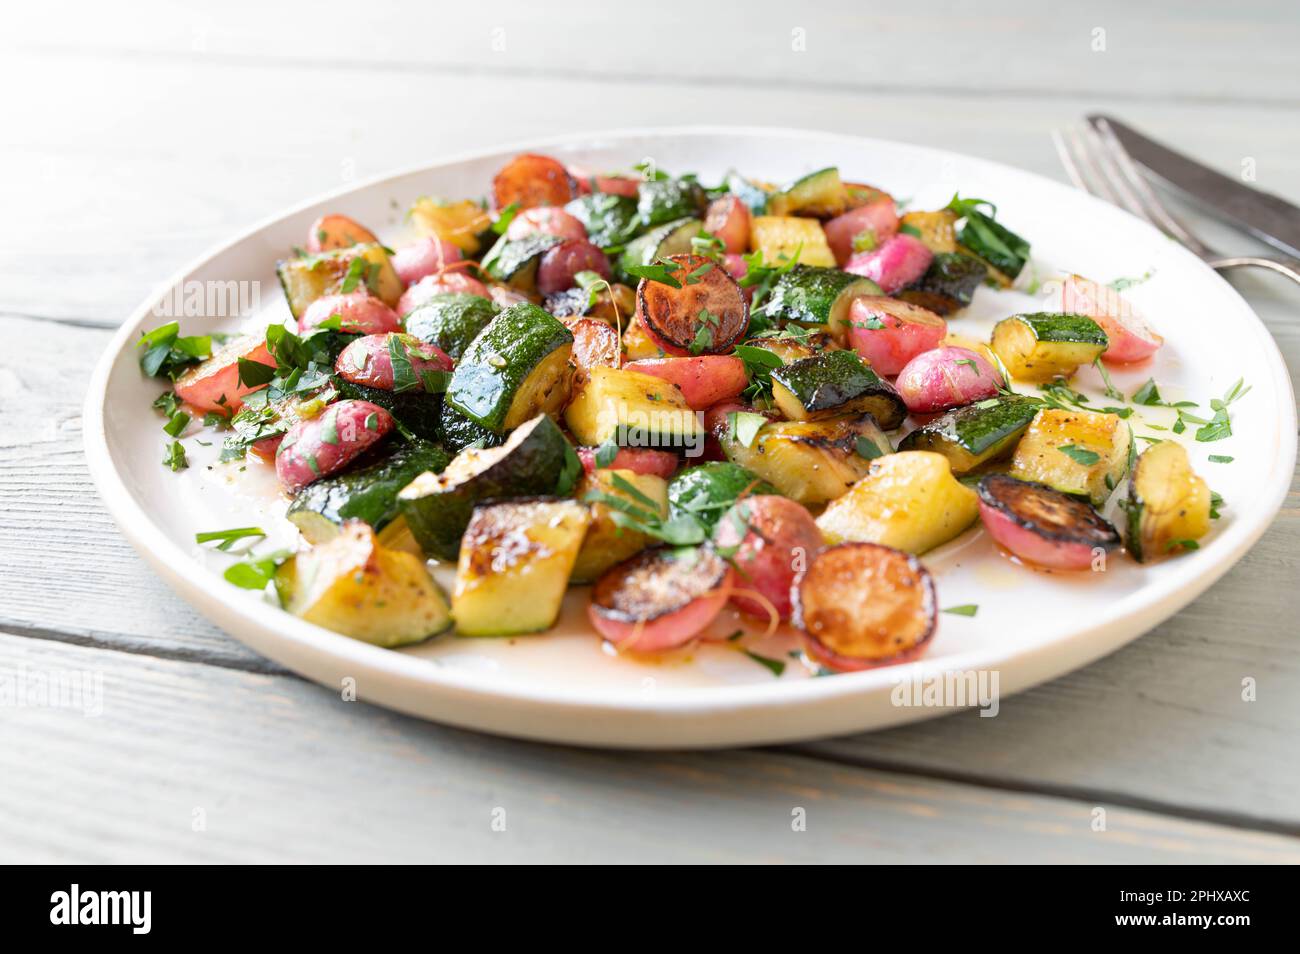 Pan fried caramelized vegetables with red radish, zucchini, parsley and olive oil Stock Photo